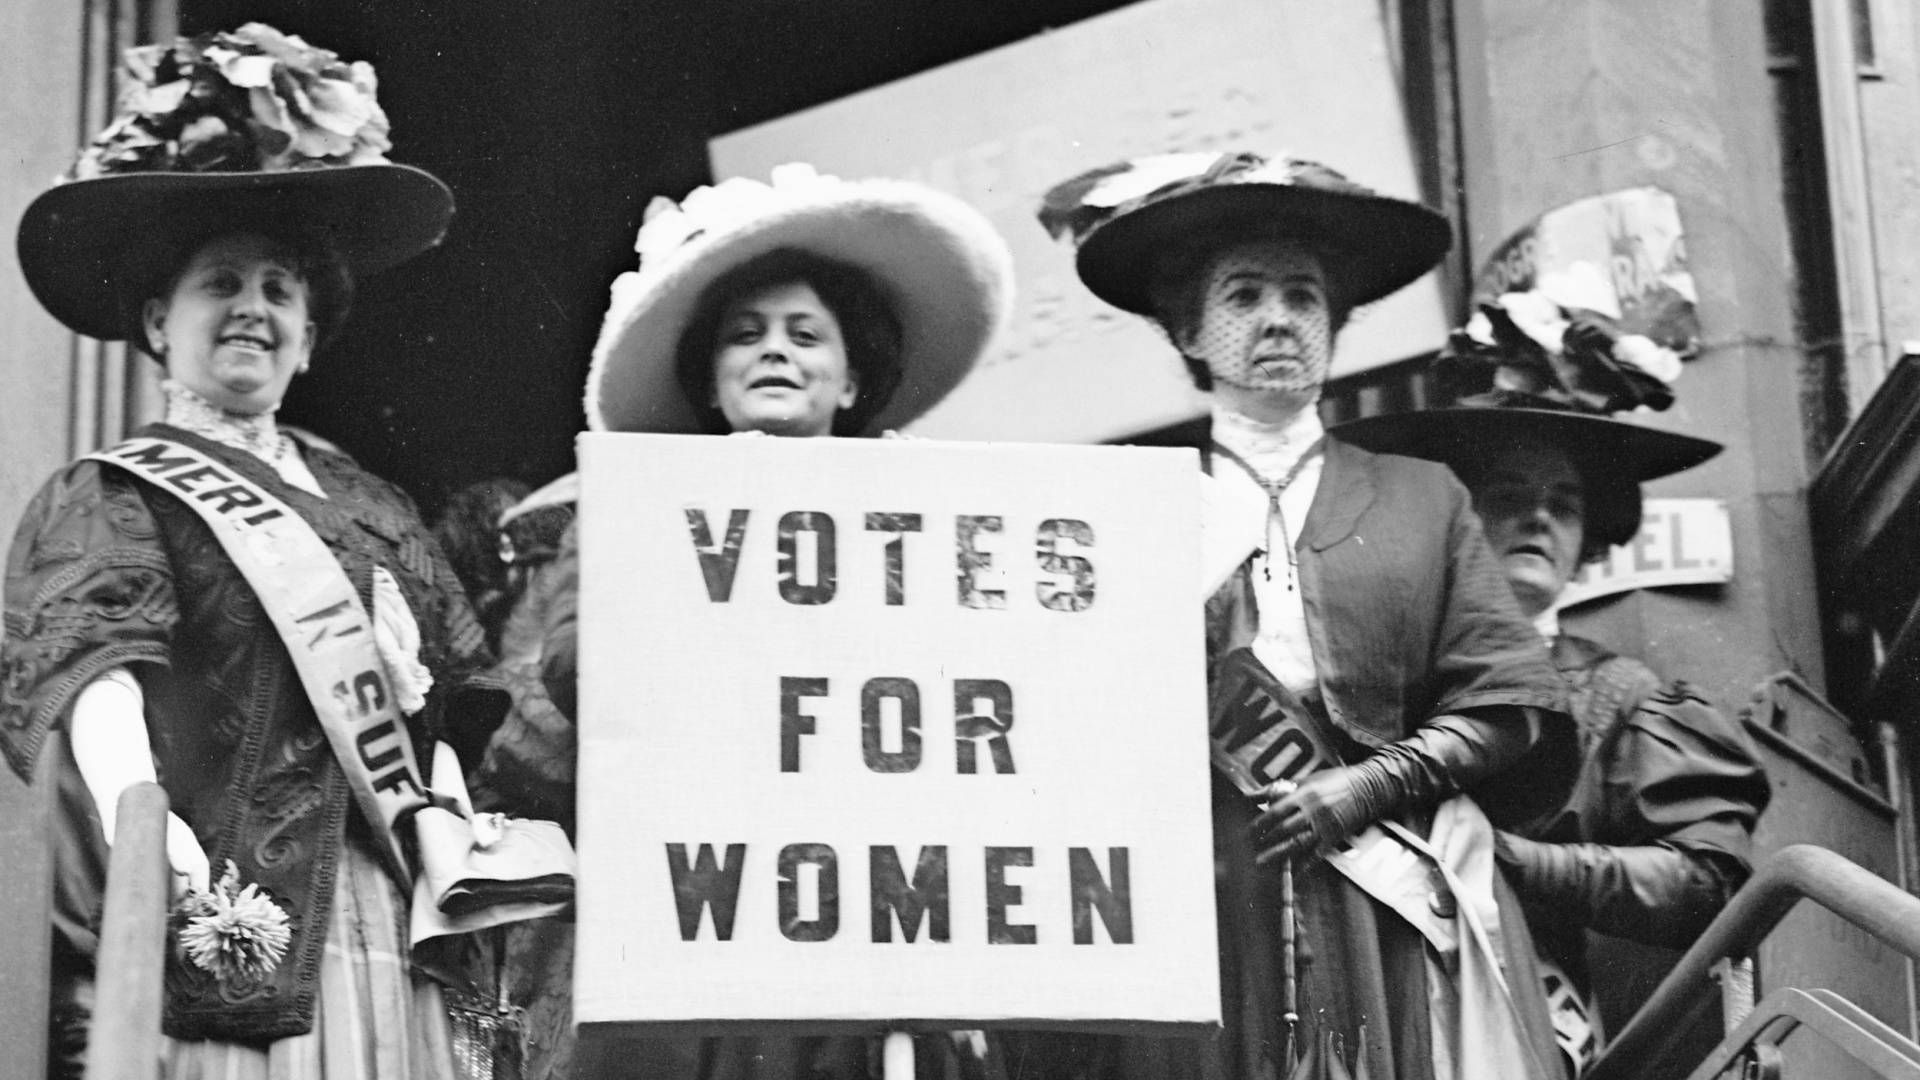 a group of people wearing hats and holding a sign